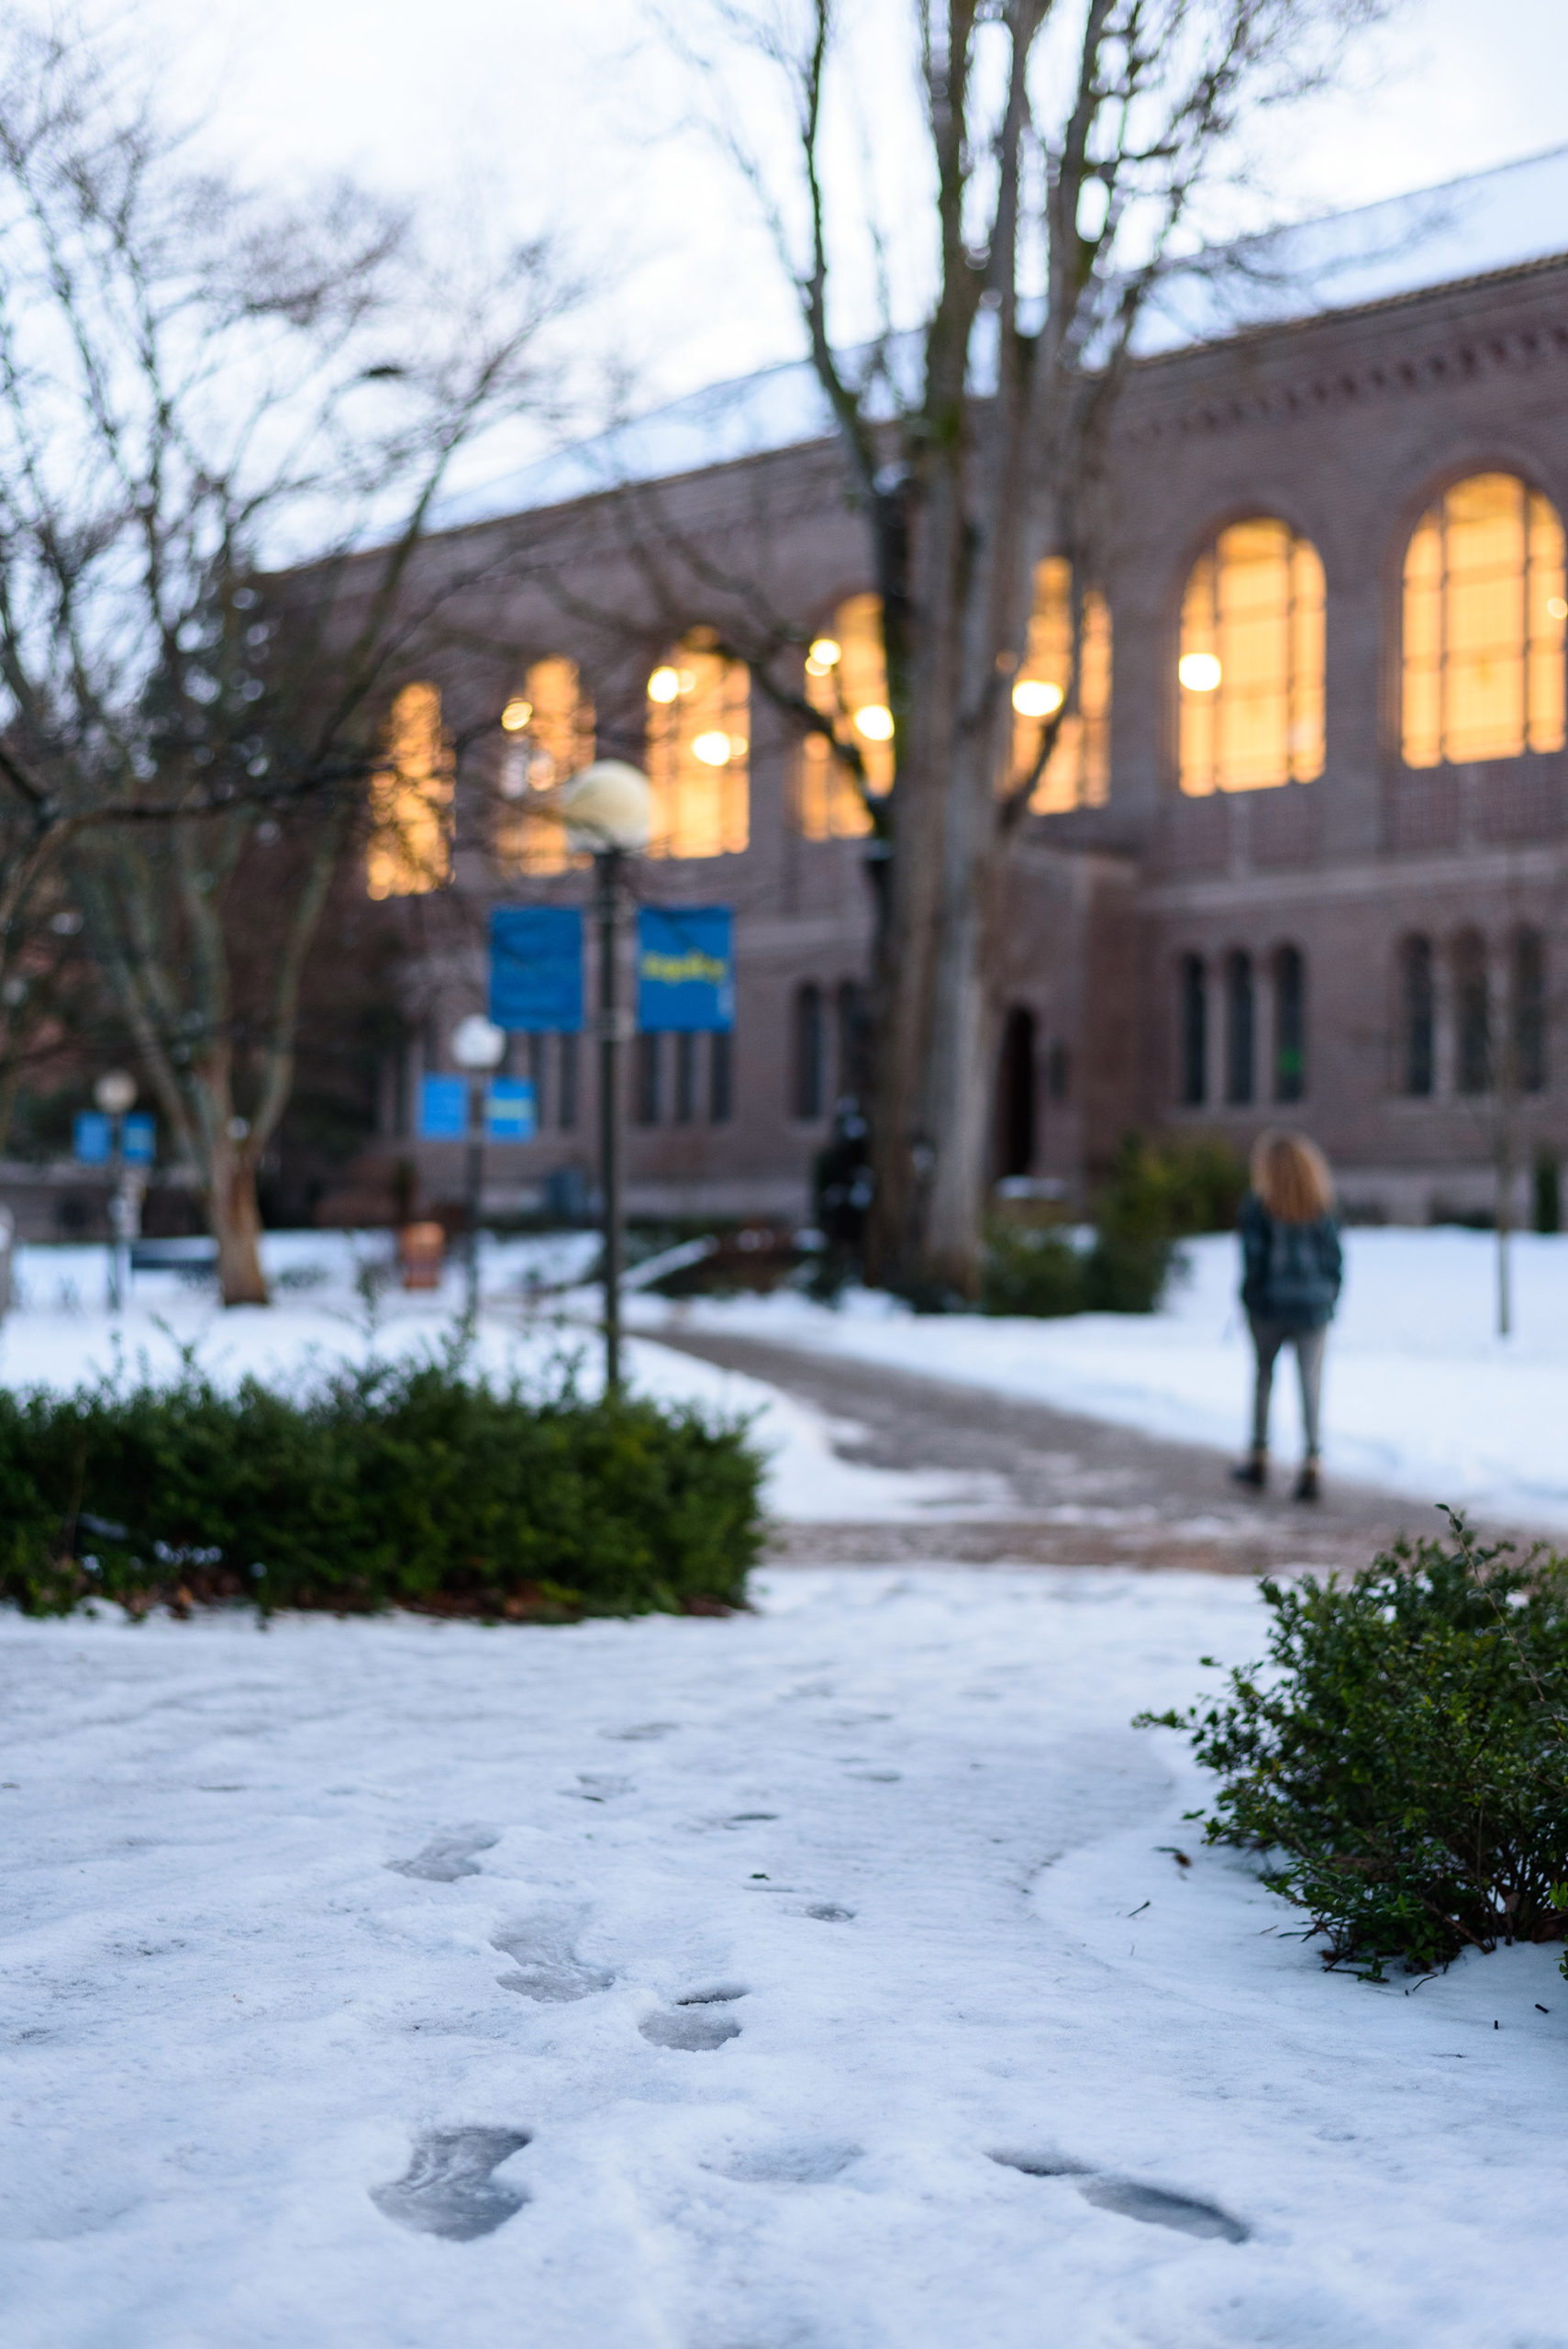 Image of footprints in the snow on an uncleared path from the Viking Union to Wilson Library.